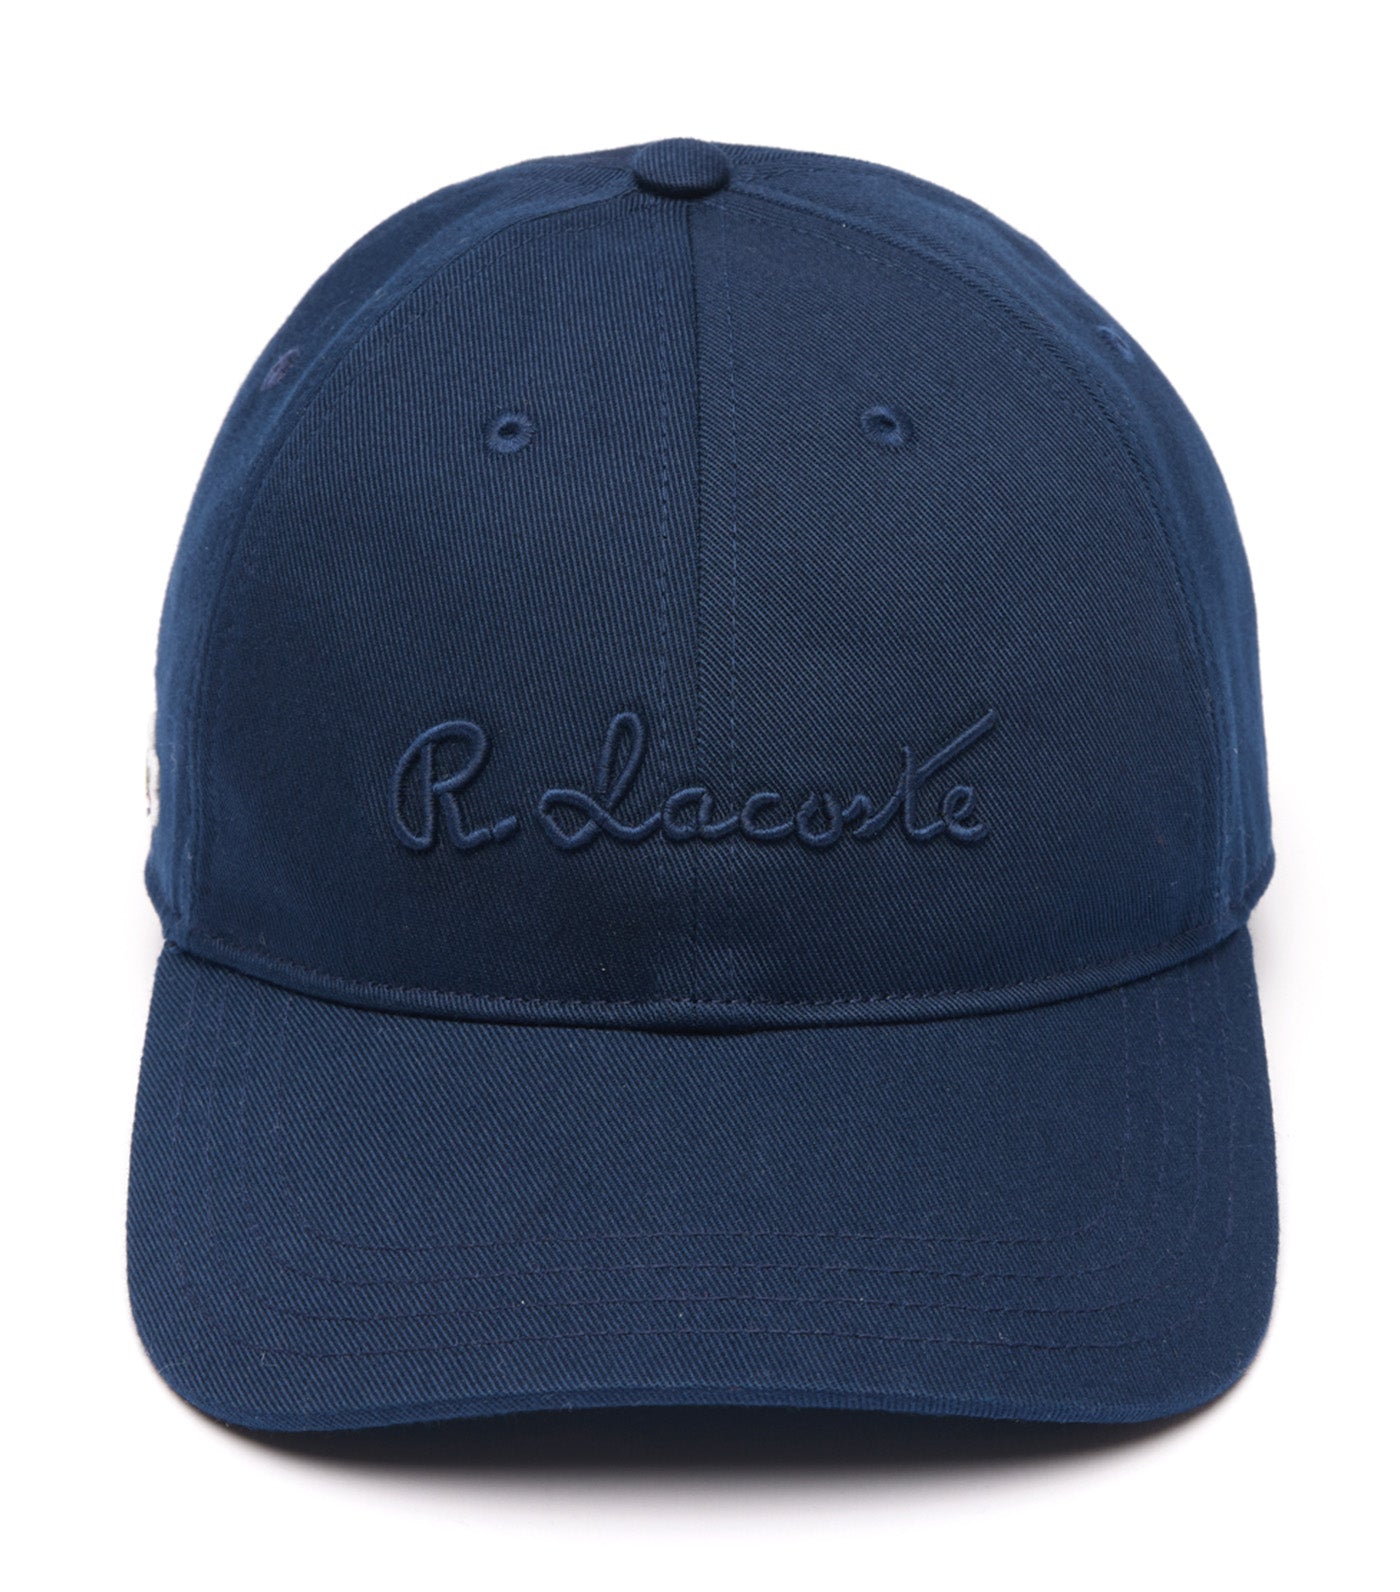 R. Lacoste 3D Embroidered Cap Navy Blue